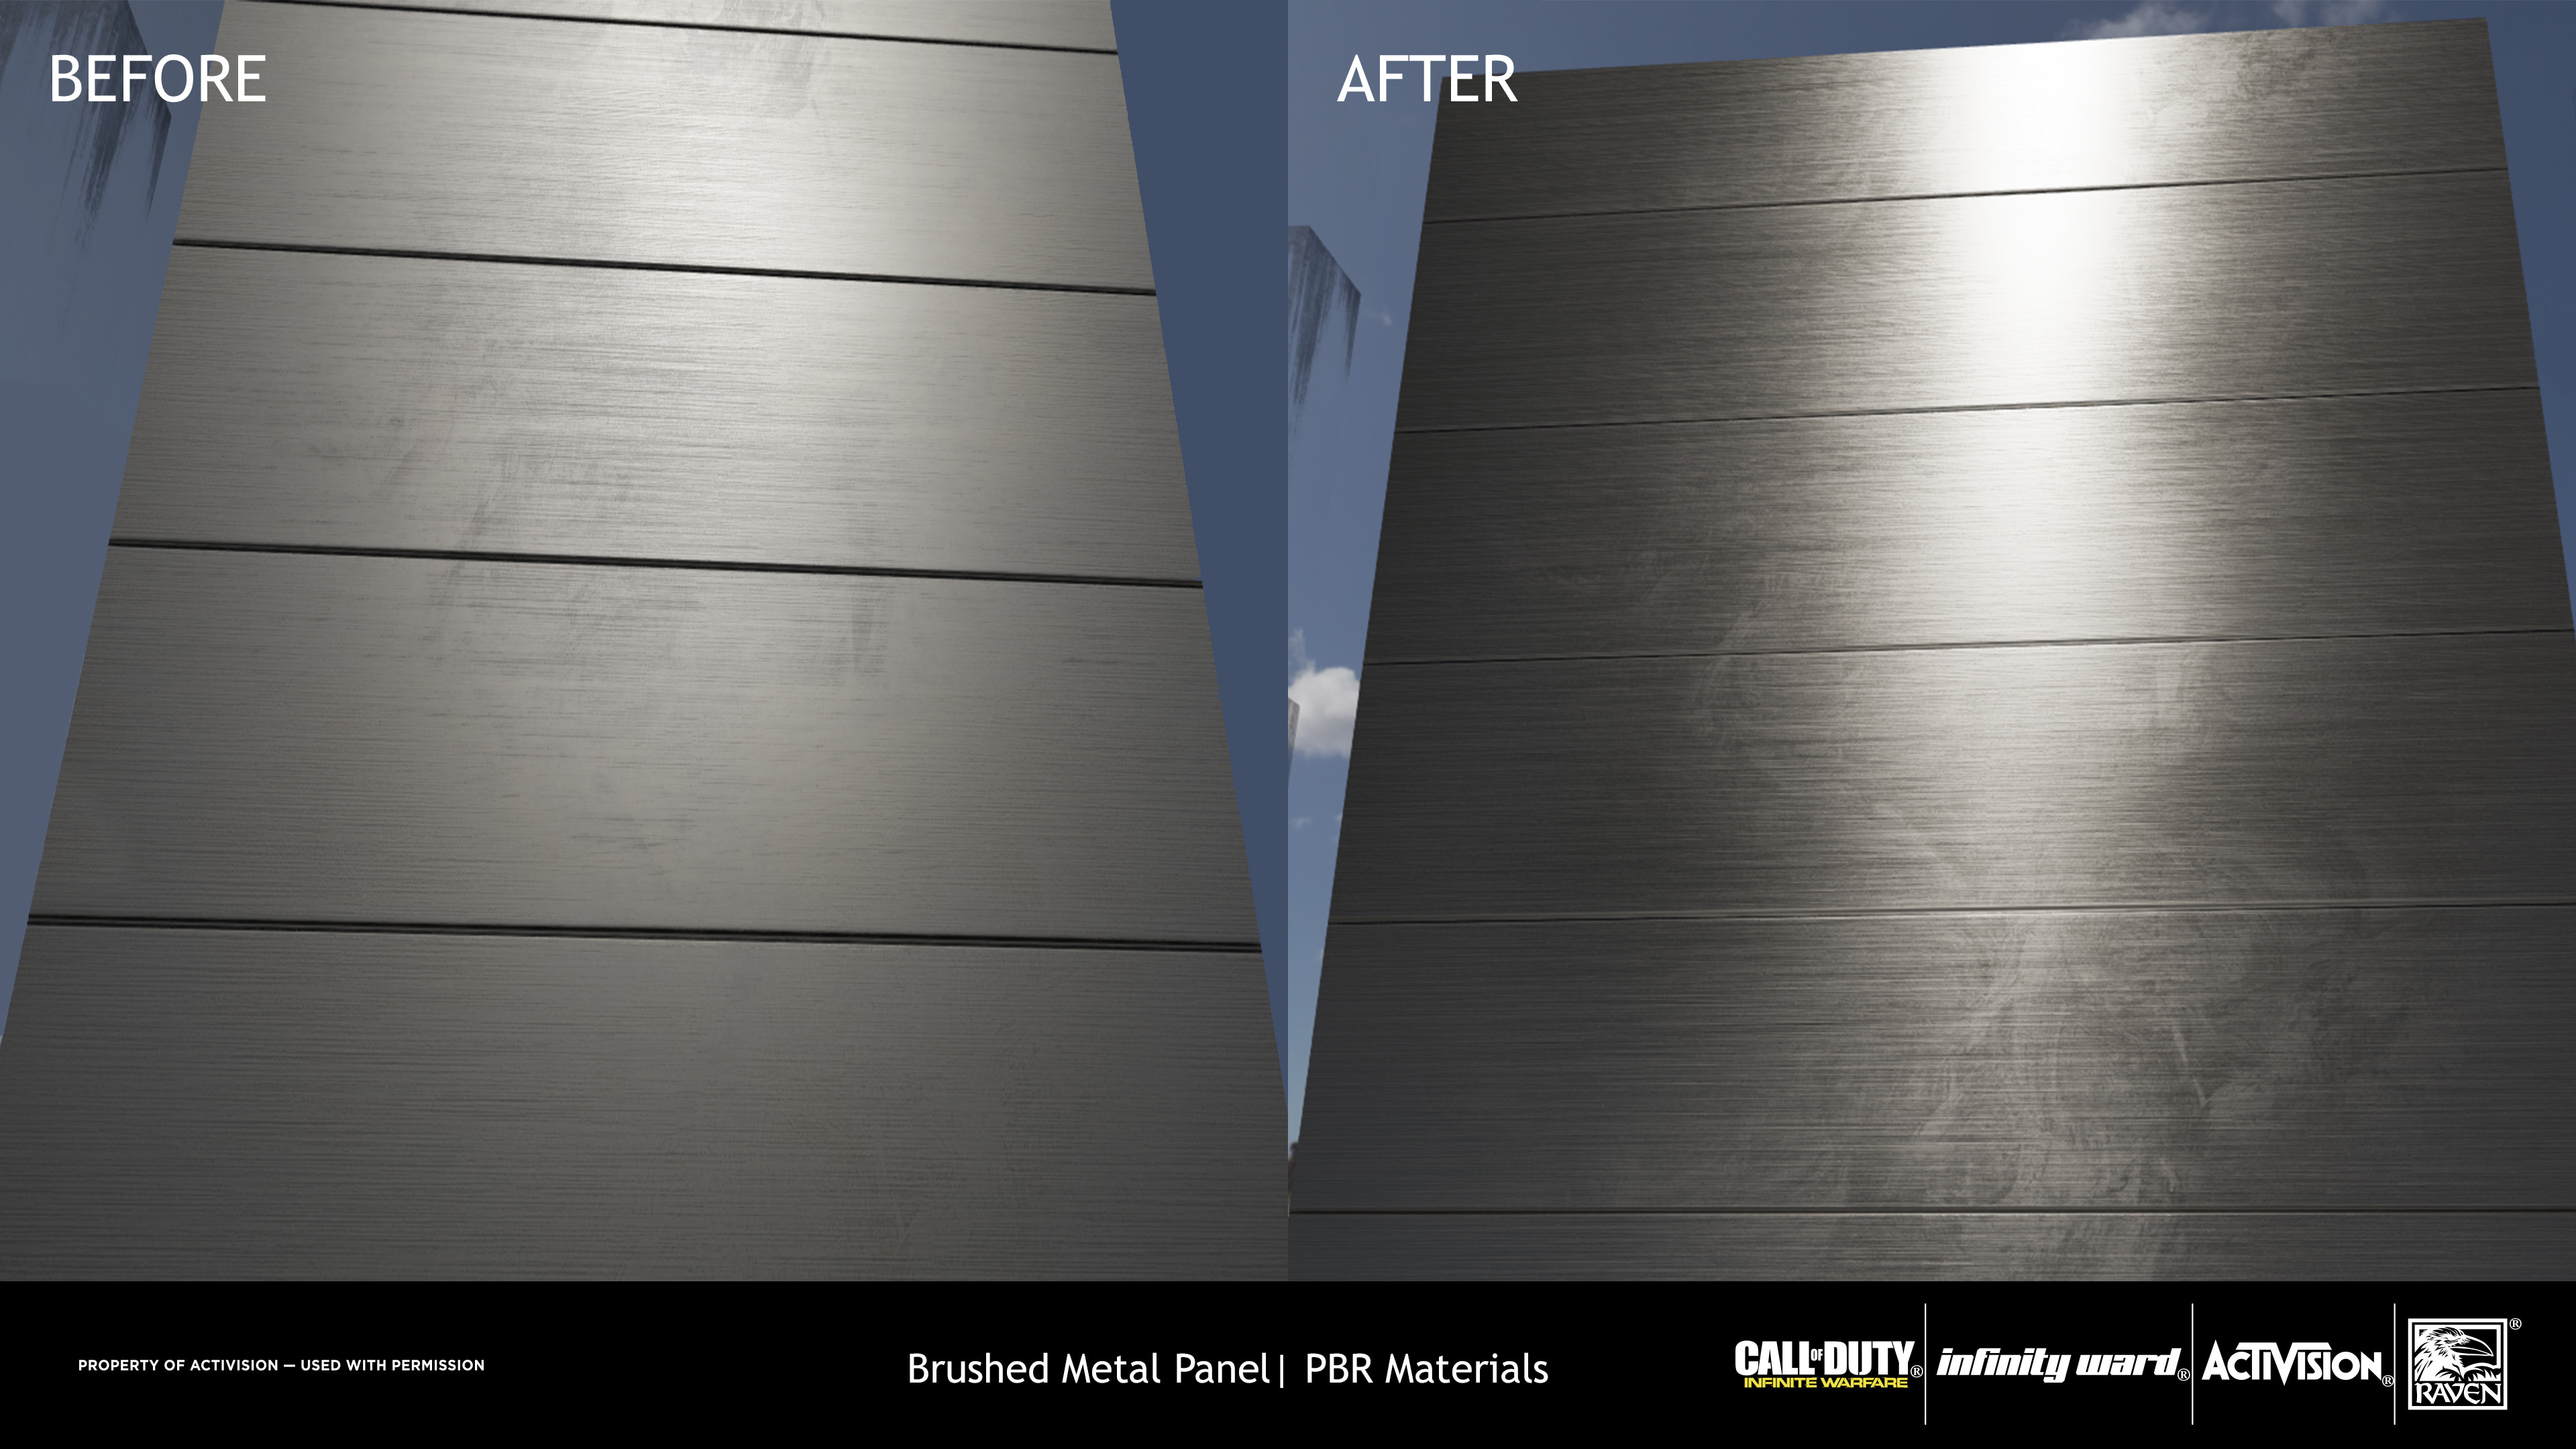 Specular and Gloss values were fixed as well as the creation of a mask for the Anisotropic Shader to enhance the brushed metal look.